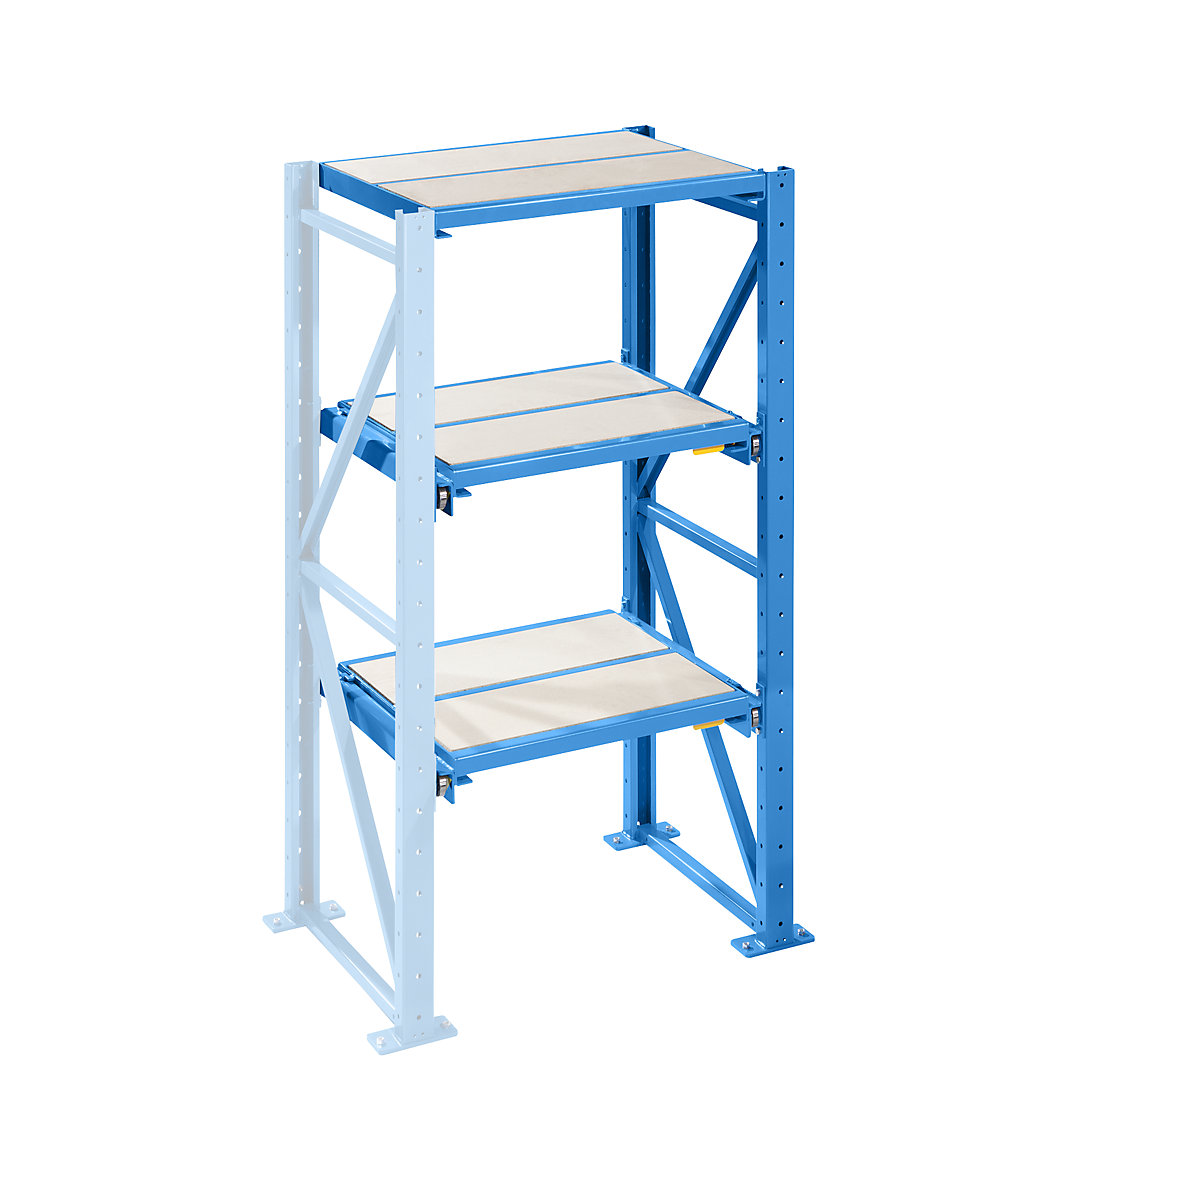 Heavy duty pull-out shelving unit - LISTA